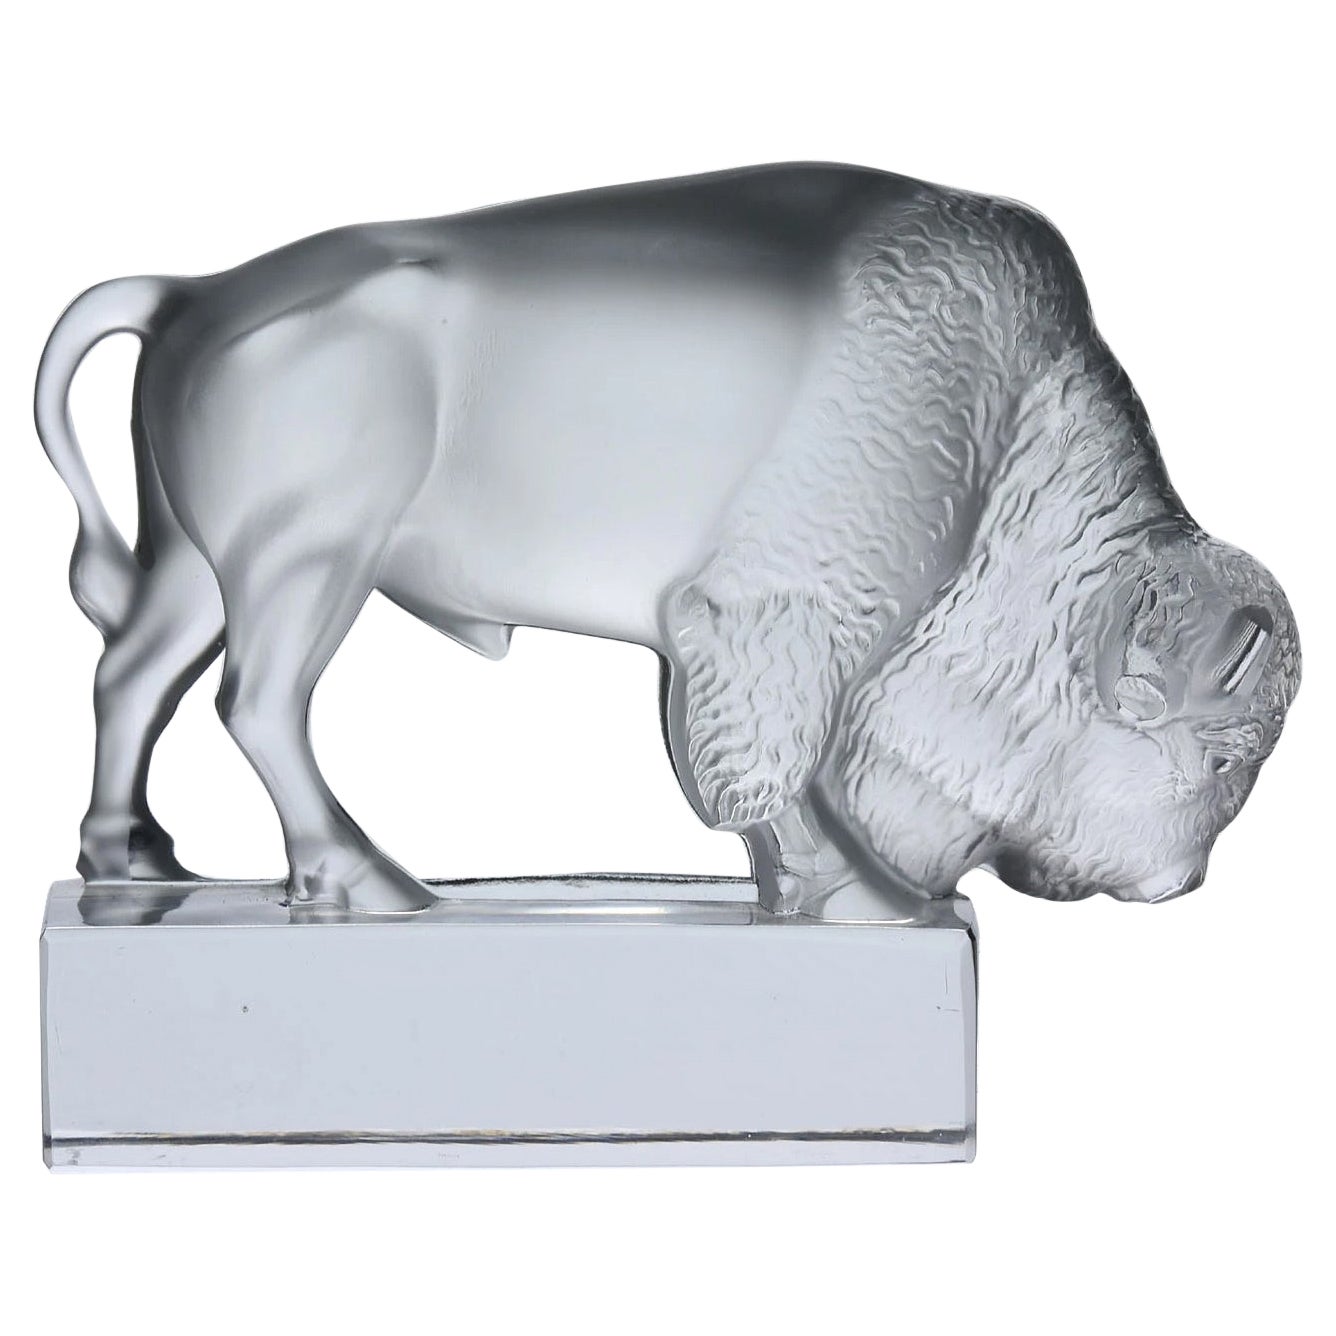 20th Century Clear Glass Sculpture Entitled "Bison Paperweight" by Lalique Glass For Sale